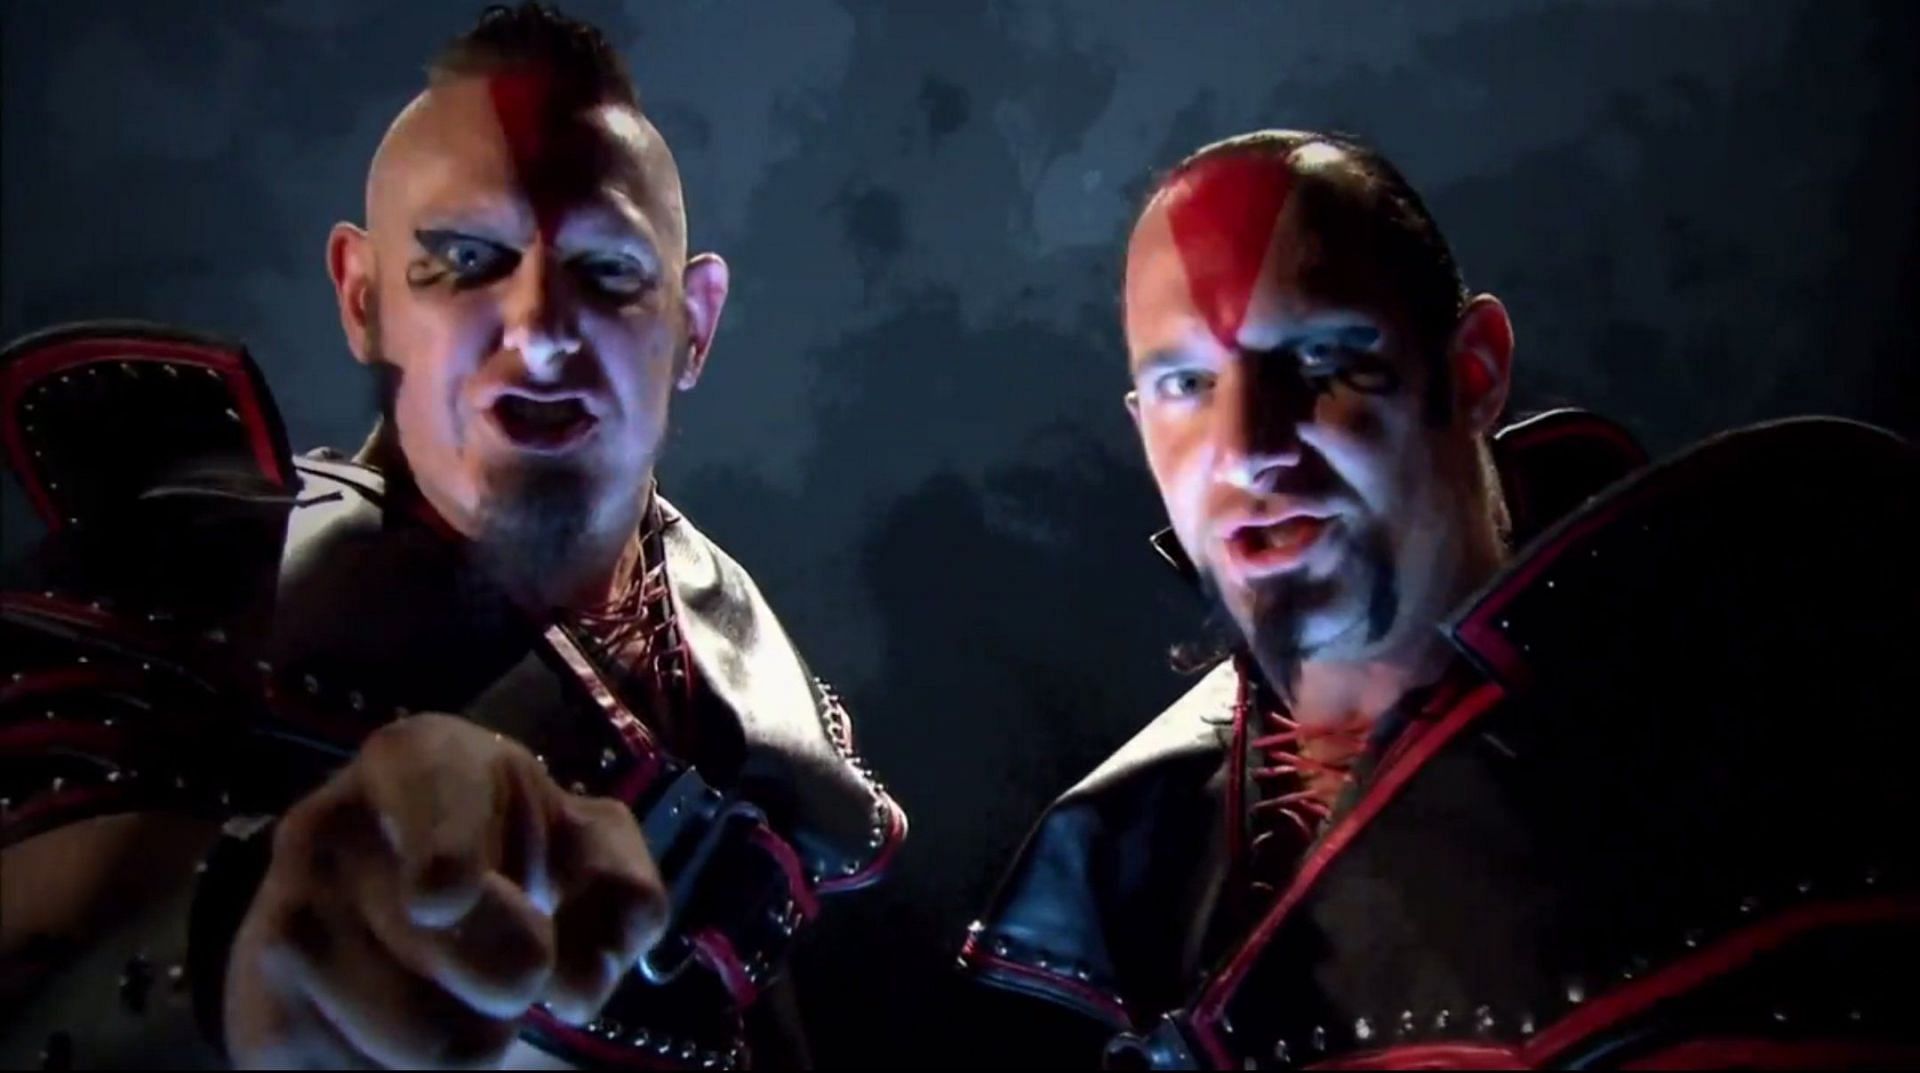 NXT Tag Team Superstars The Ascension